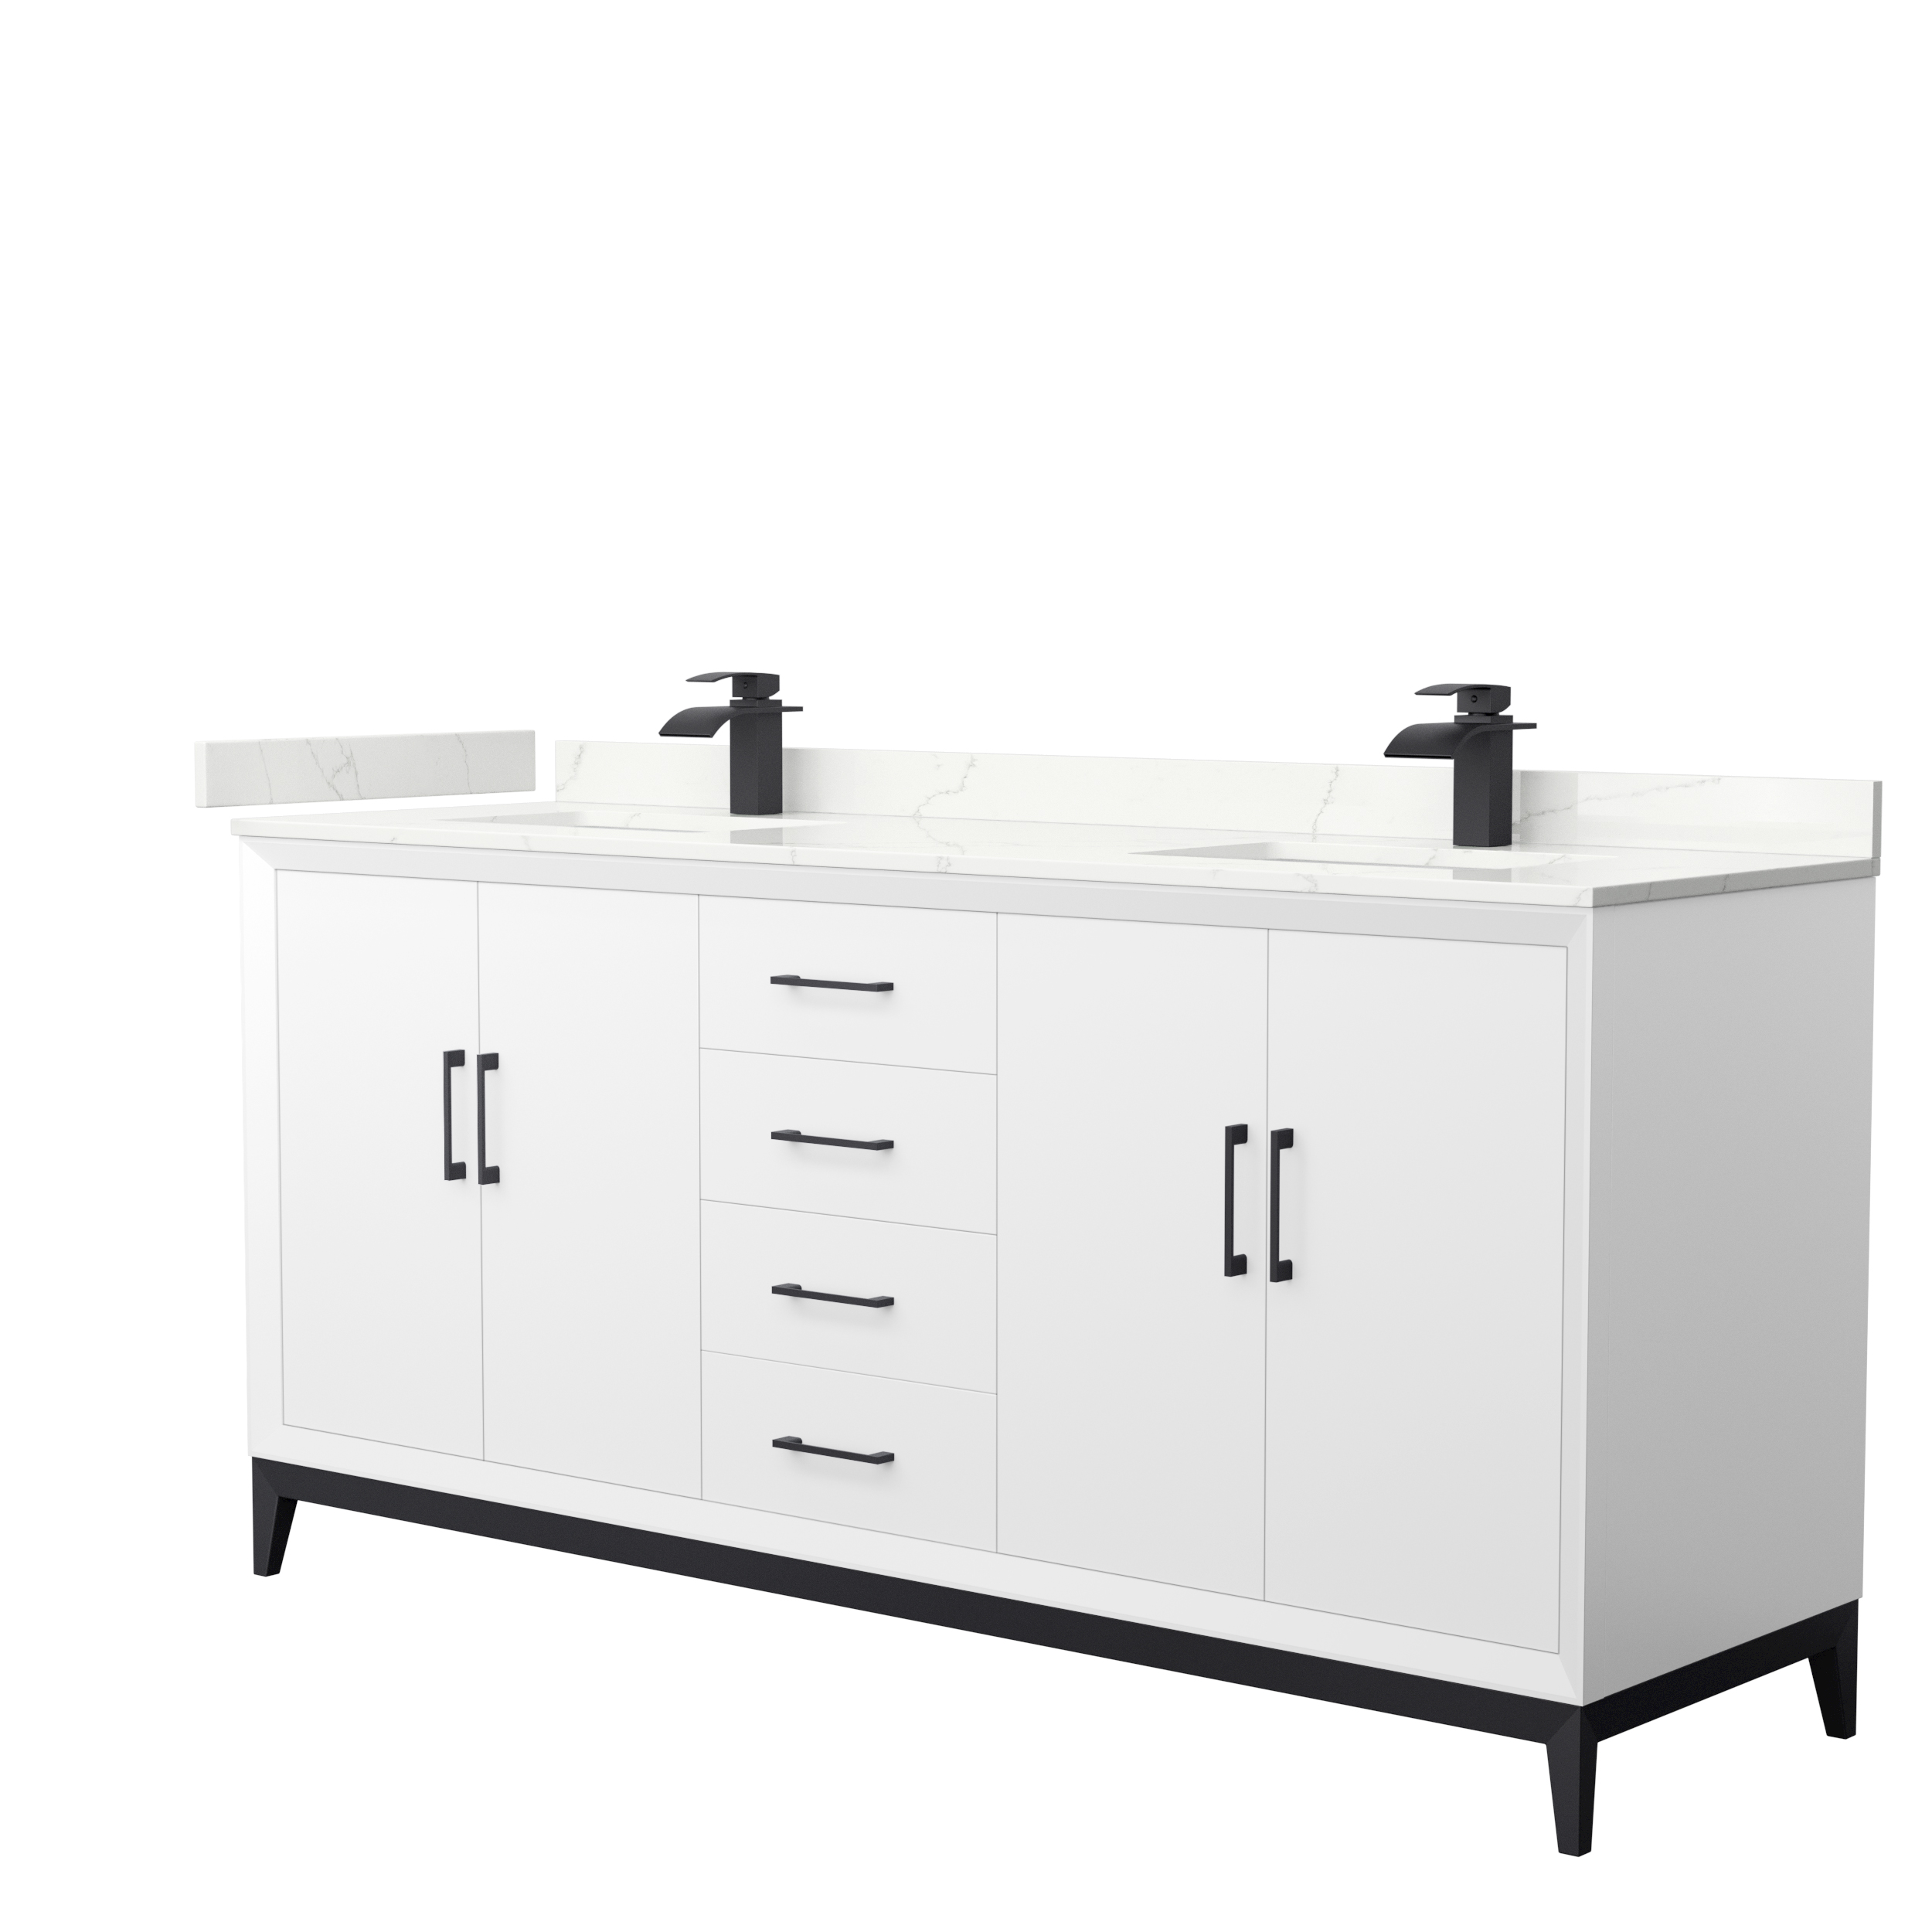 Amici 72" Double Vanity with optional Carrara Marble Counter - White WC-8181-72-DBL-VAN-WHT